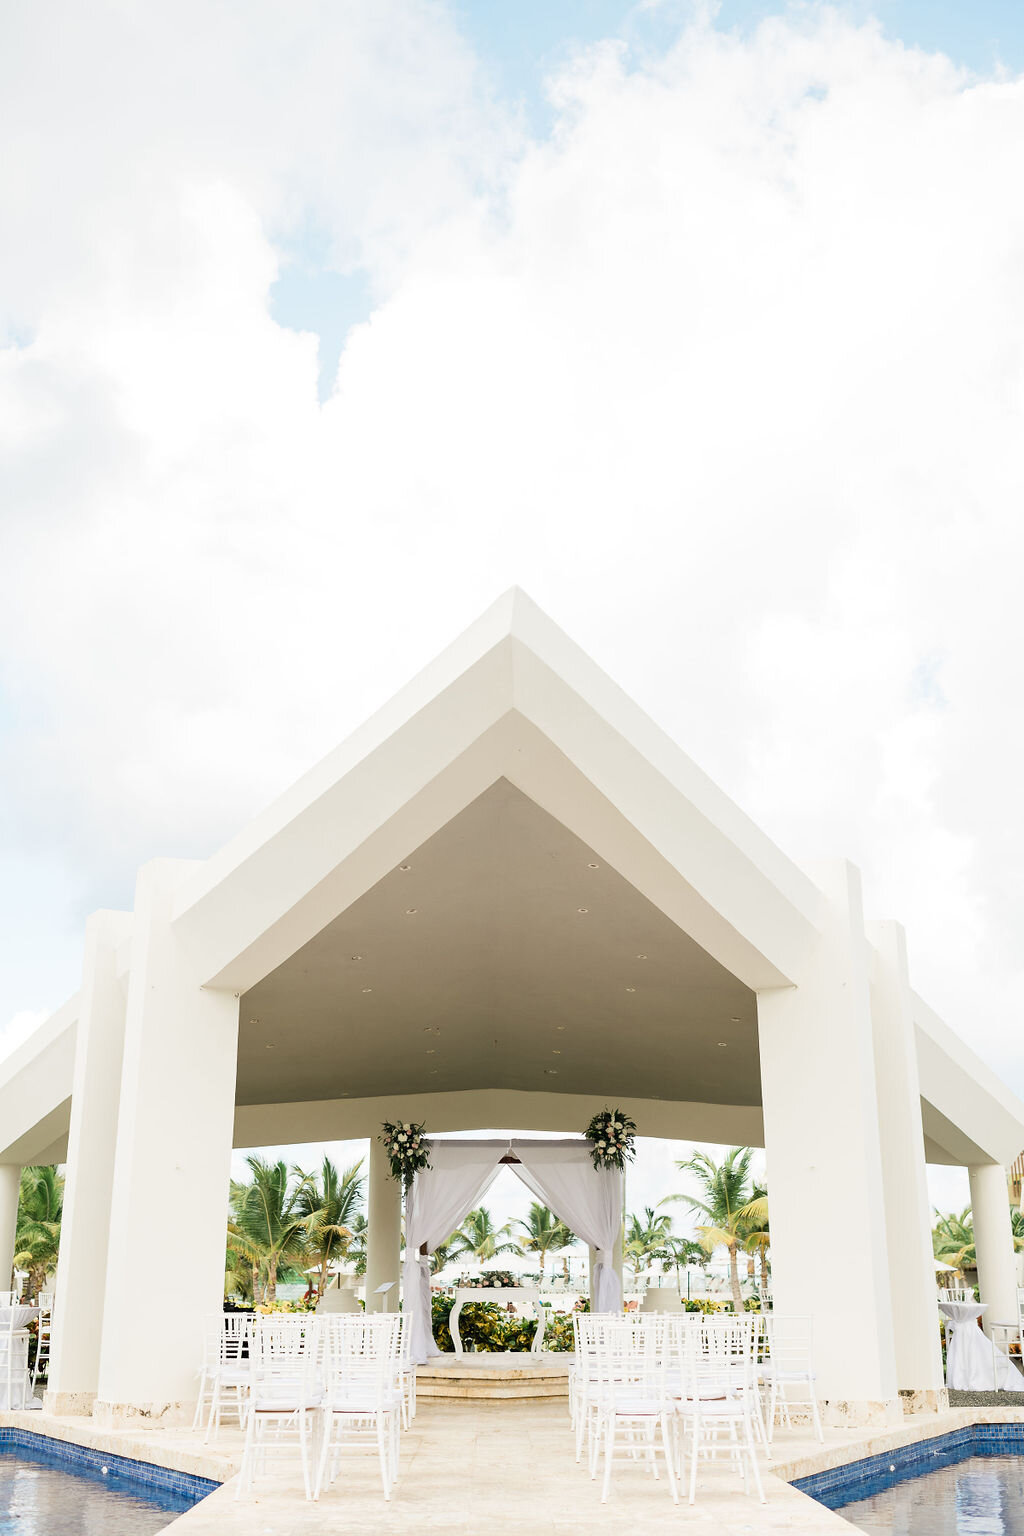 Ceremony setup at Now resort in Punta Cana